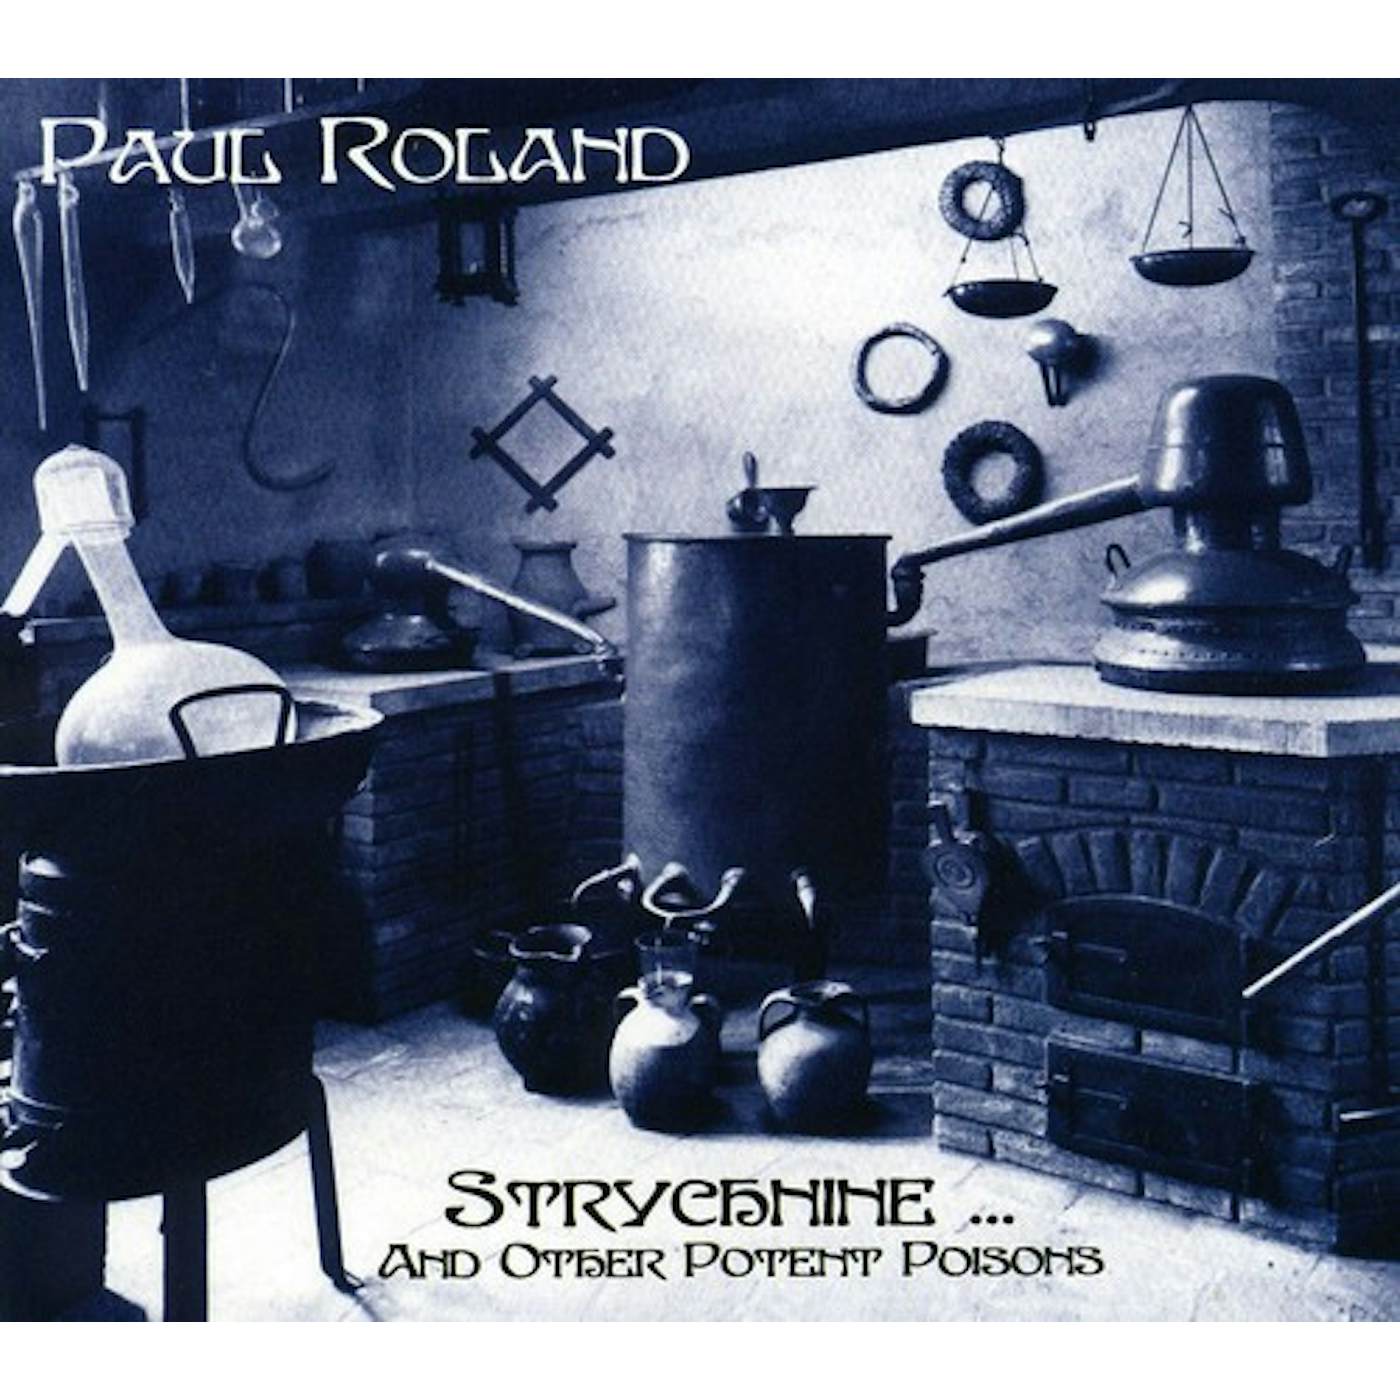 Paul Roland STRYCHNINE & OTHER POTENT POISONS CD